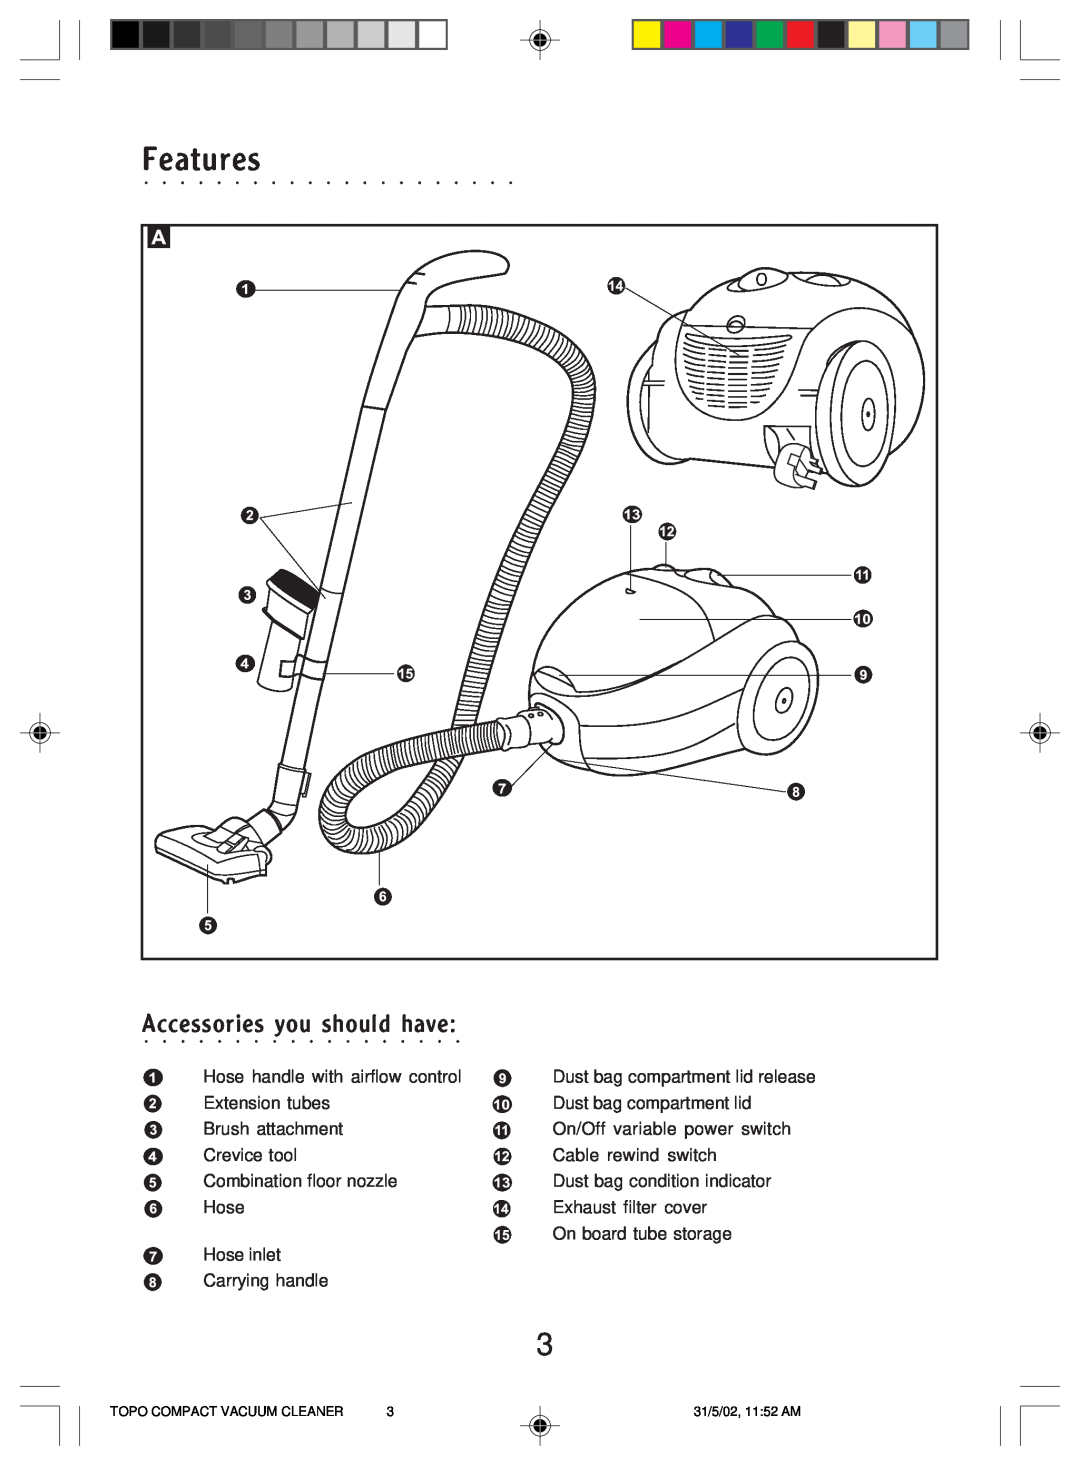 Morphy Richards Topo compact vacuum cleaner manual Features, Accessories you should have, Topo Compact Vacuum Cleaner 